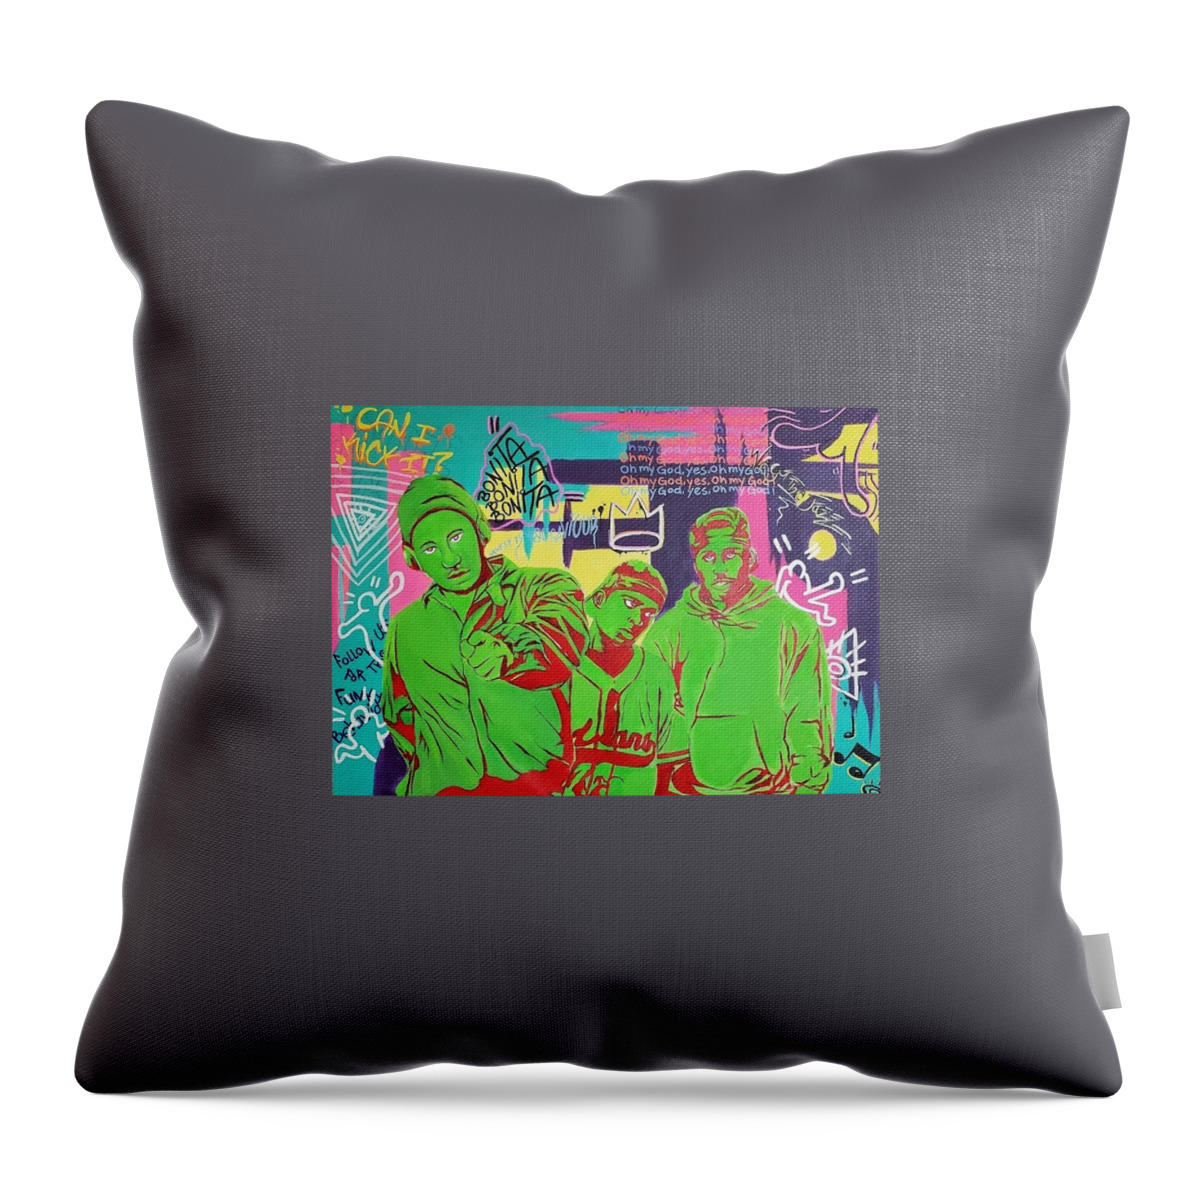 Hiphop Throw Pillow featuring the painting Lyrics to Go by Ladre Daniels